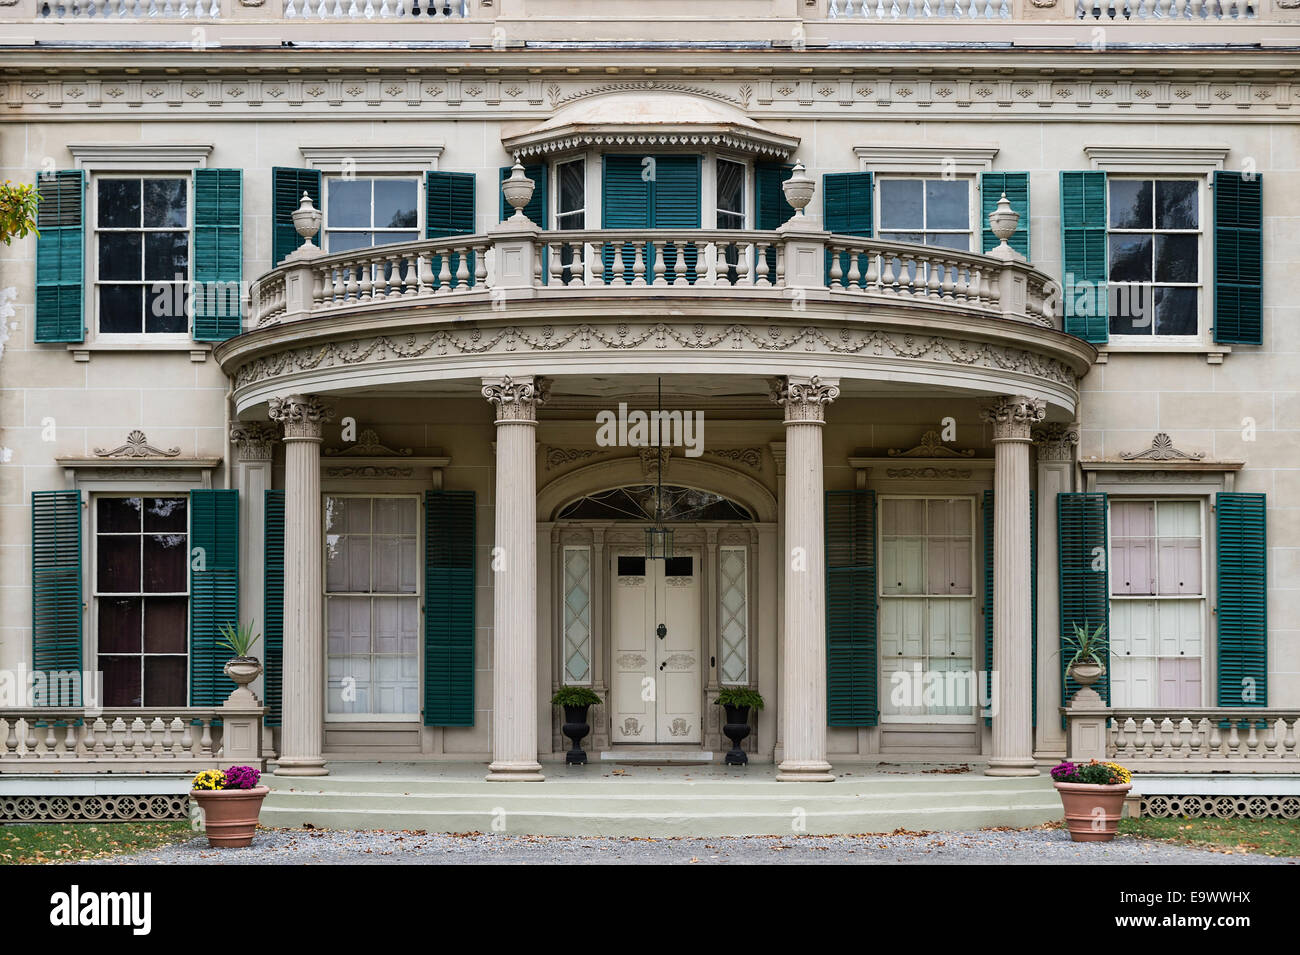 Montgomery Place, historisches Haus, Annandale-on-Hudson, New York, USA Stockfoto